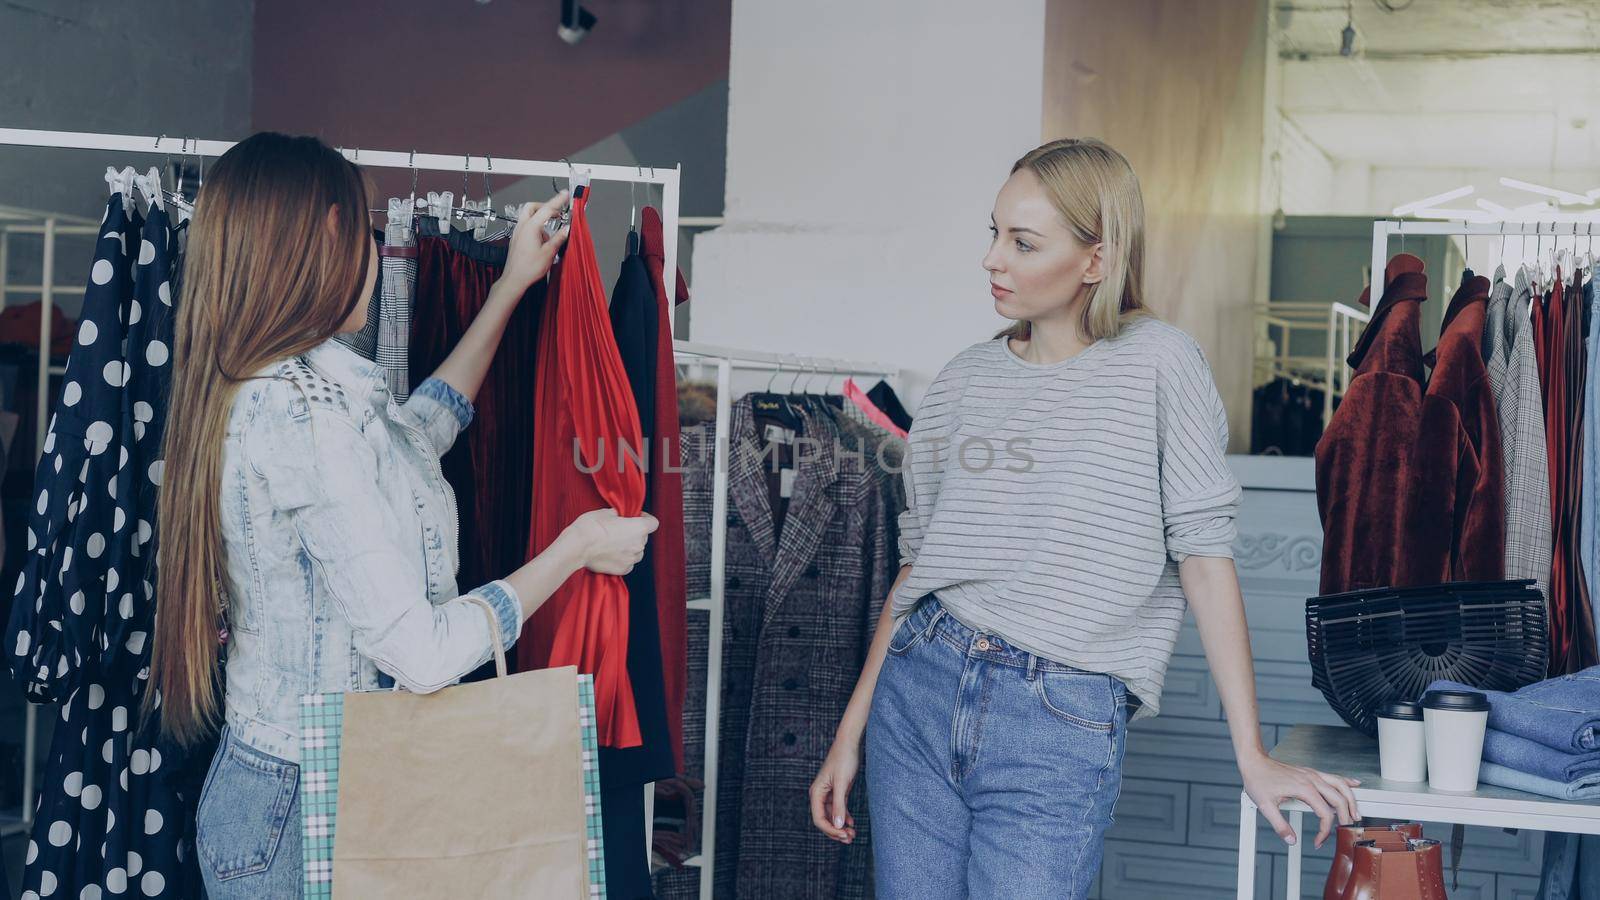 Female friends are shopping together. They are standing beside rails with stylish women's clothes, taking pleated skirt, looking at it carefully and fitting it while chatting and smiling